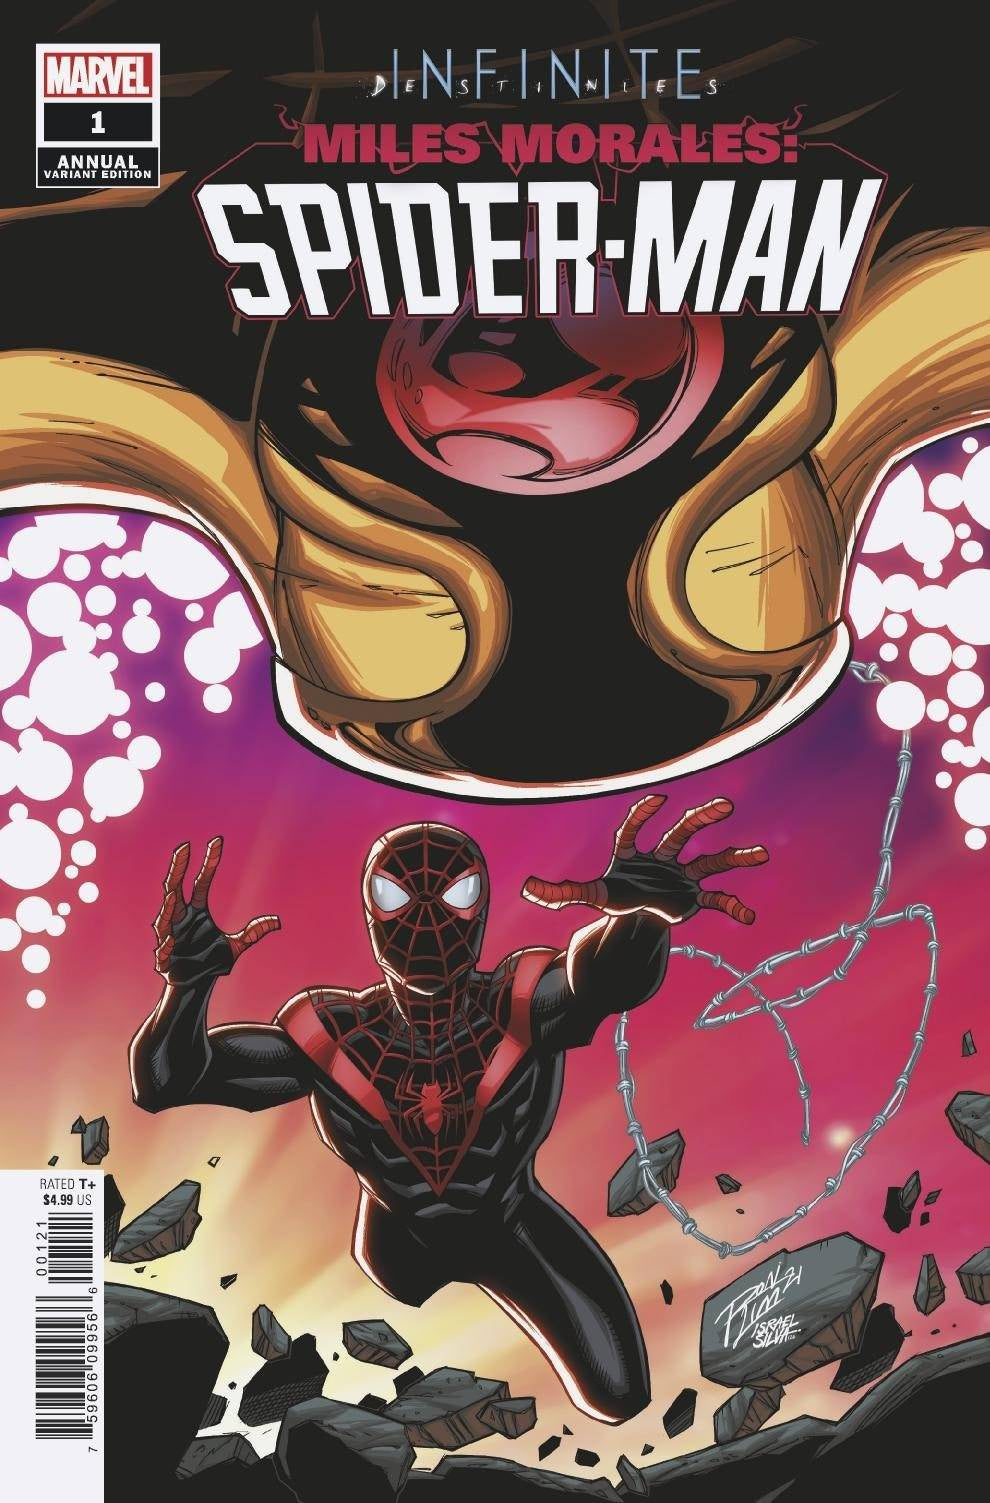 MILES MORALES SPIDER-MAN ANNUAL #1 CONNECTING VARIANT INFD